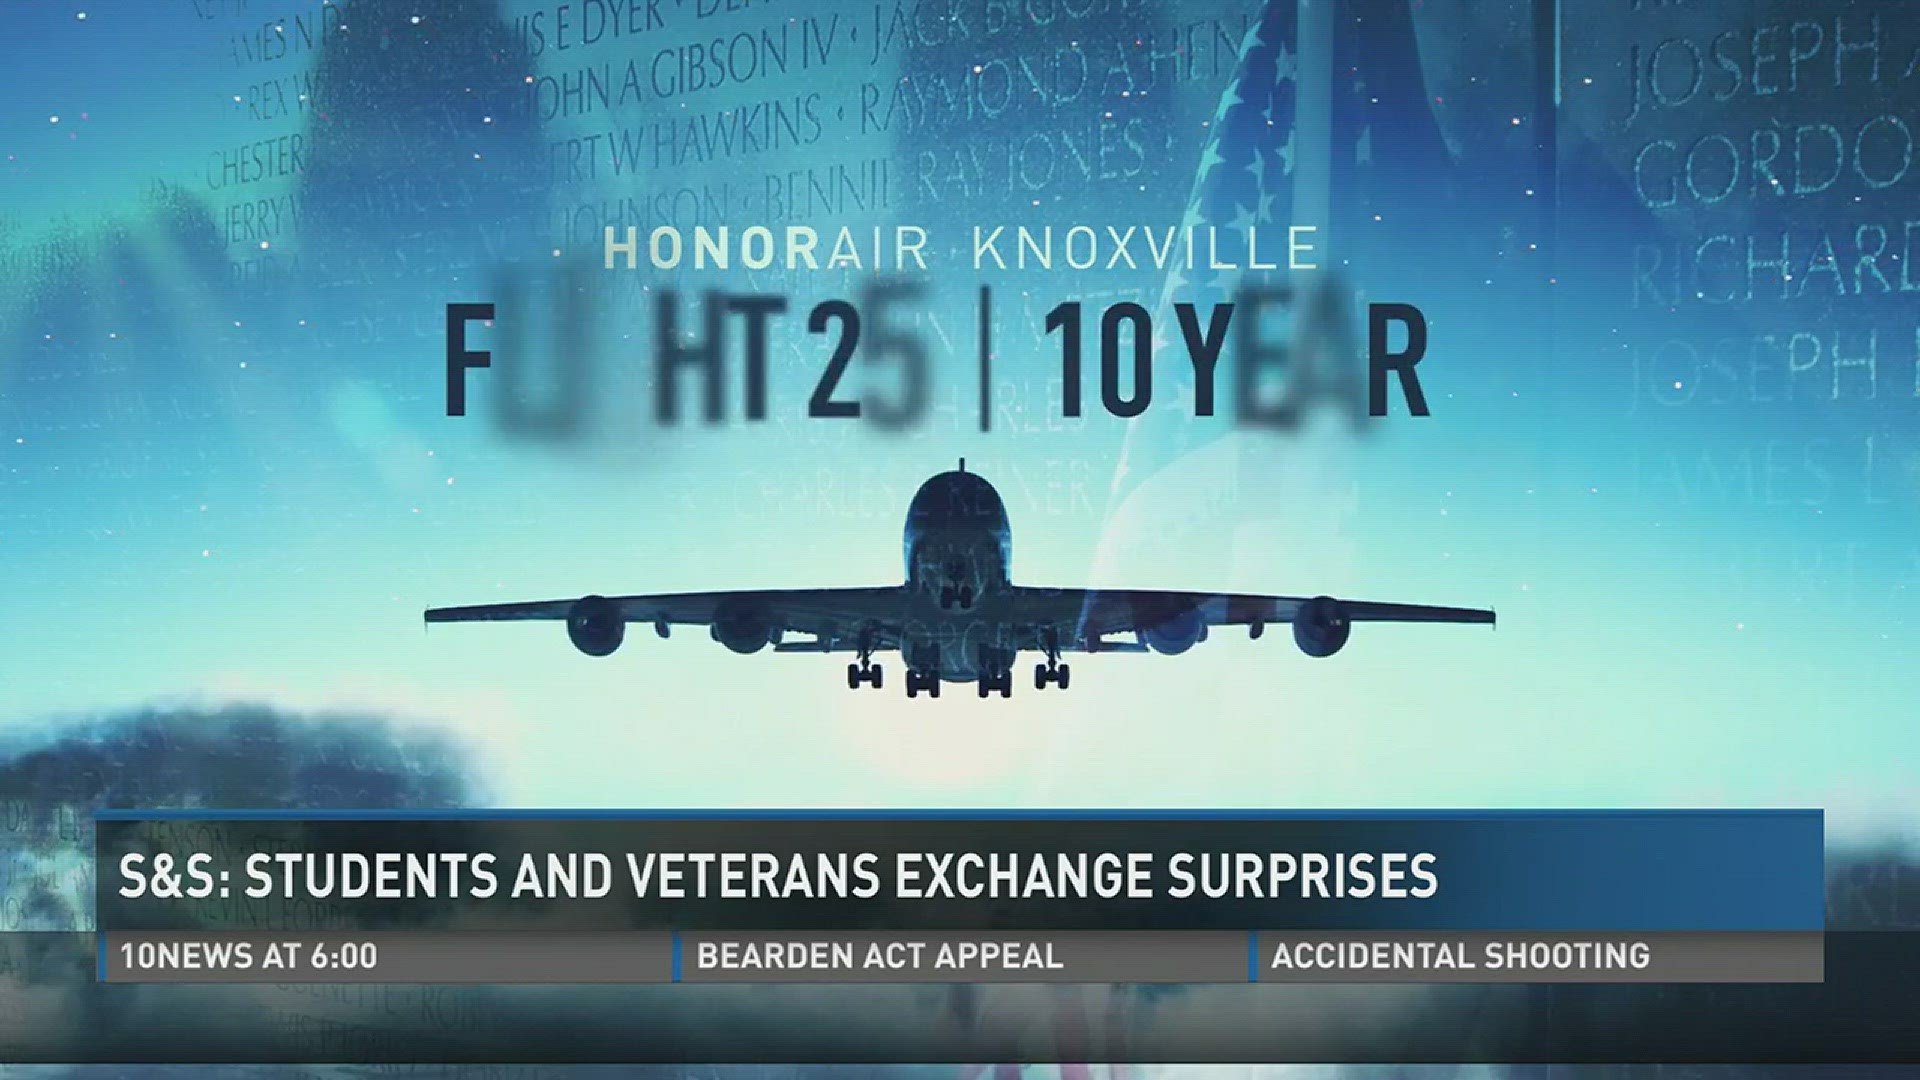 Nov. 16, 2017: A group of students and veterans exchanged surprises during and after the most recent HonorAir Knoxville flight to Washington D.C.